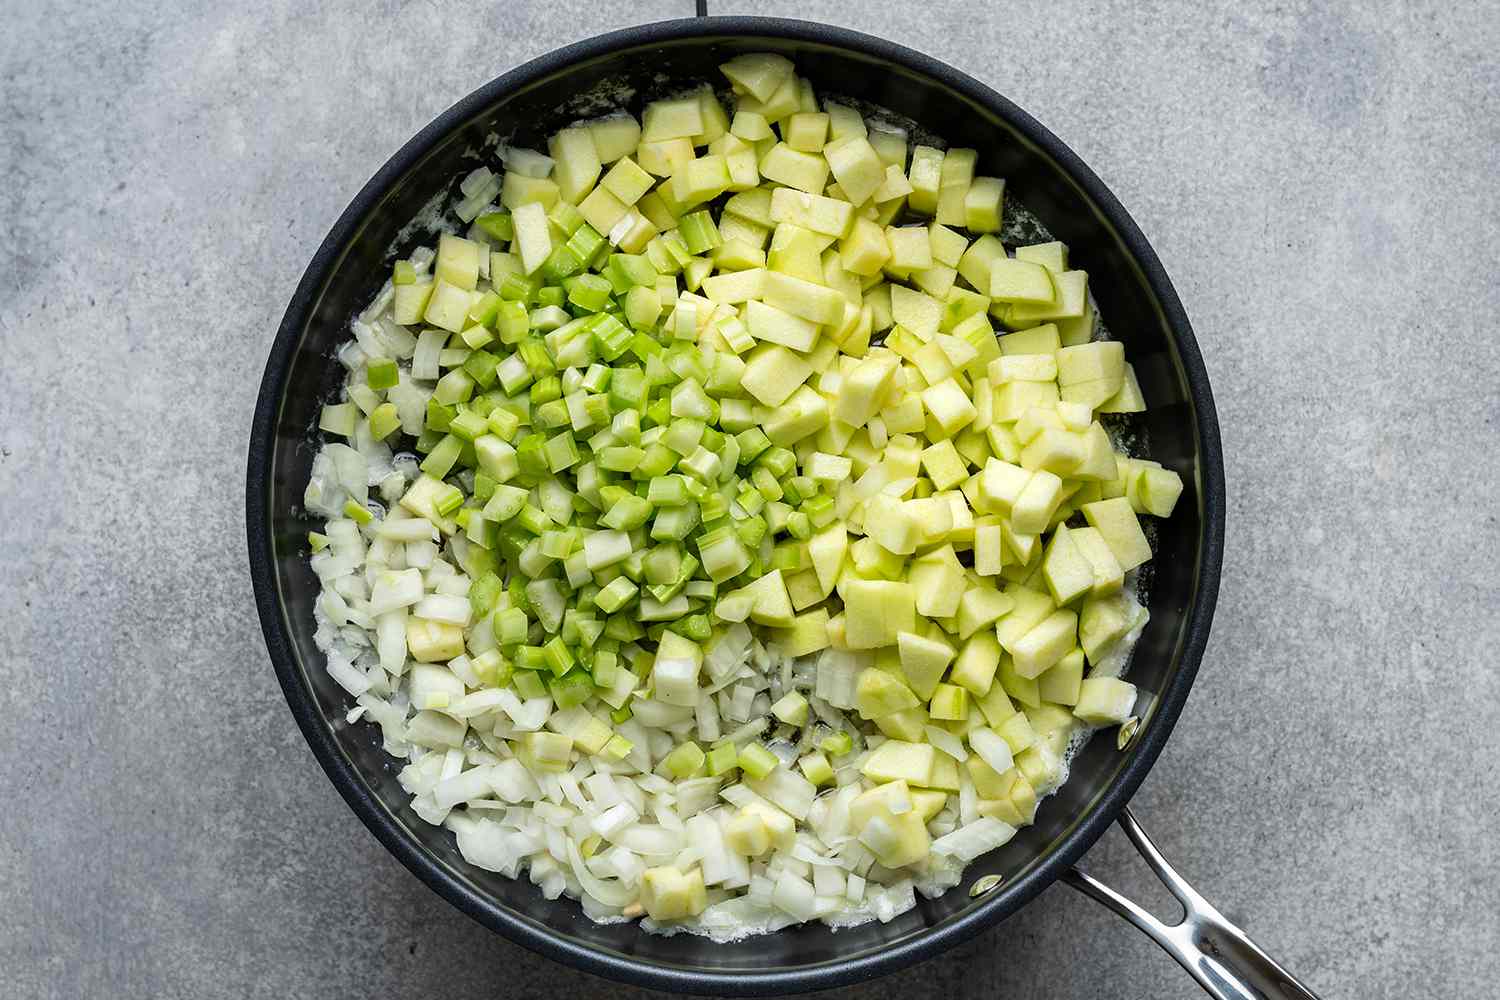 chopped onions, celery and apple in a skillet